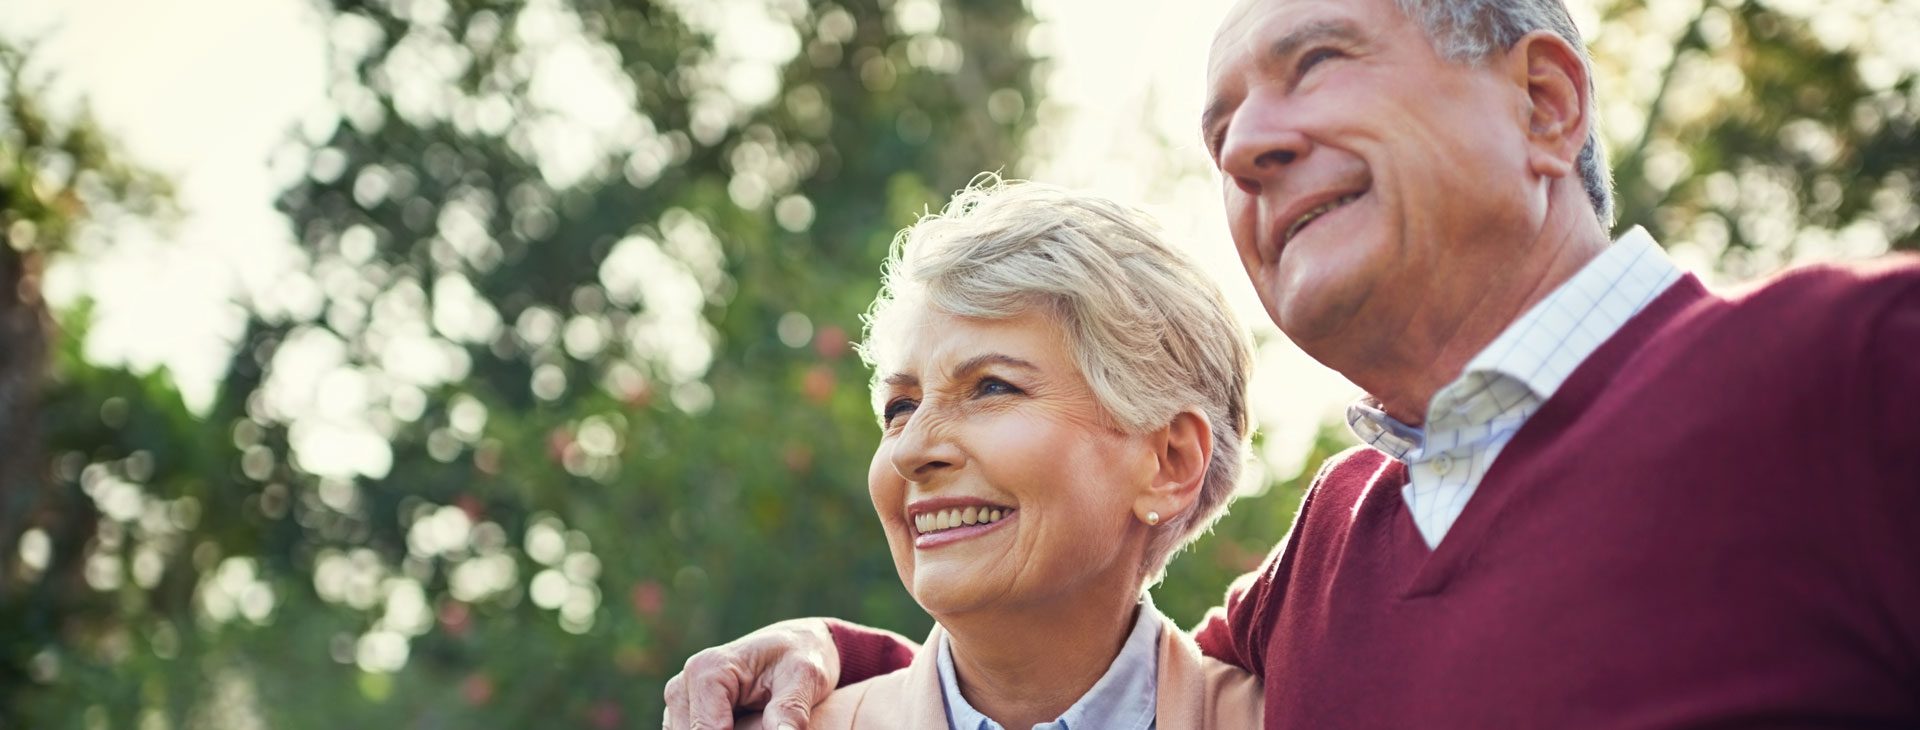 Choosing the right retirement community for you can be a tough process. read more about how to choose the right place for you. 